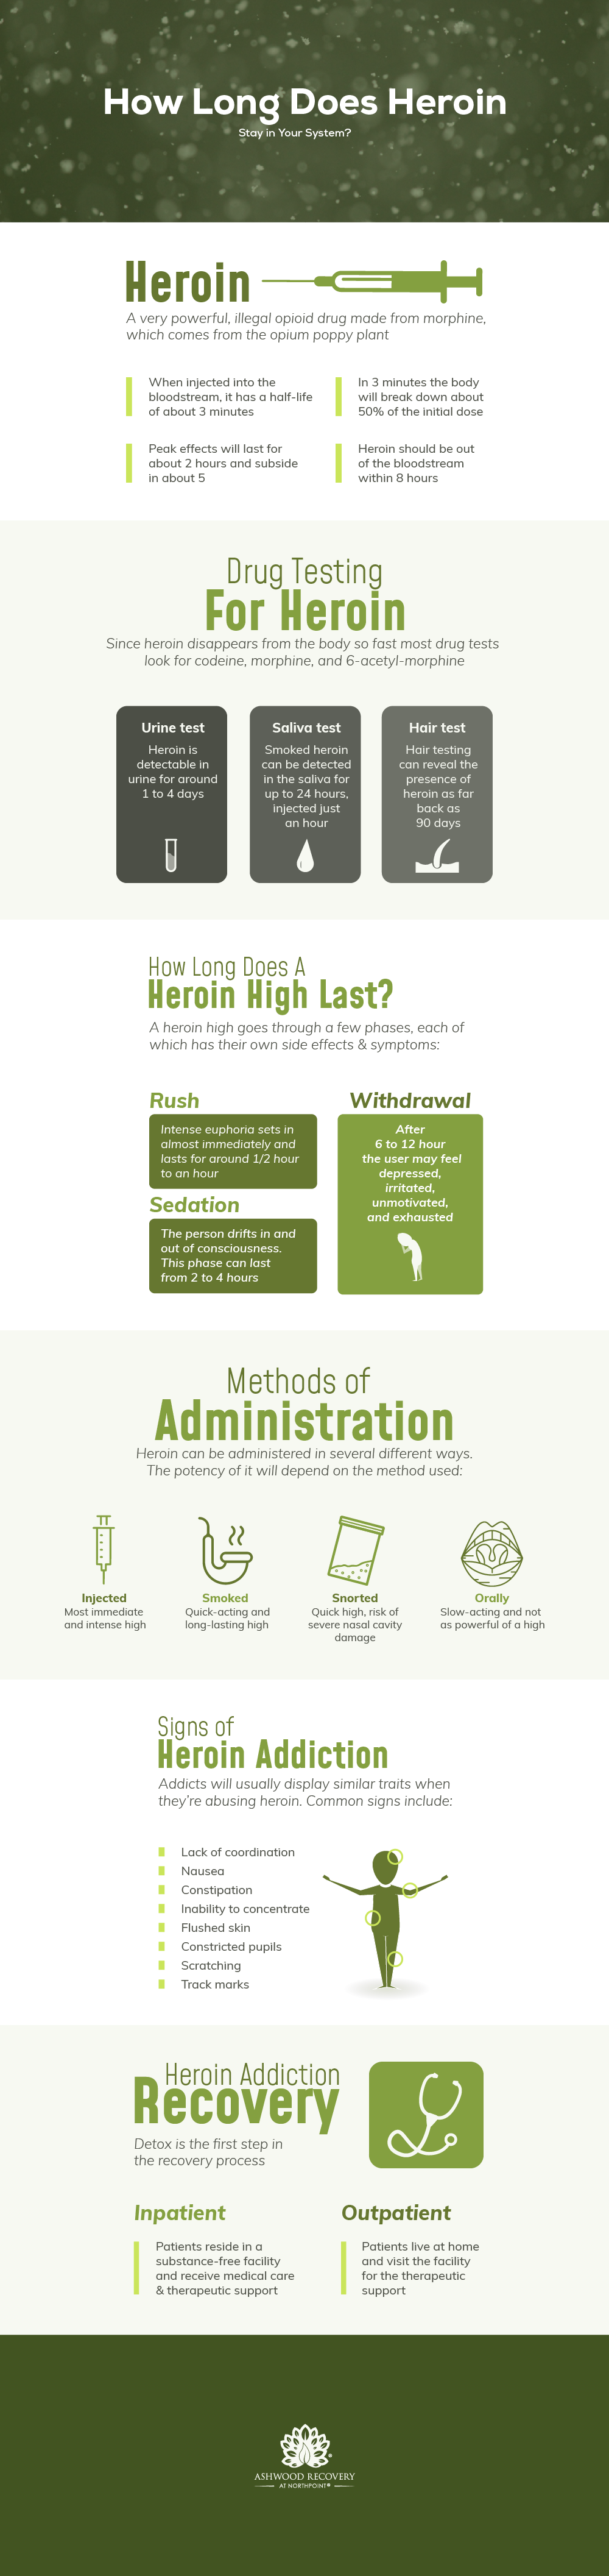 How long does heroin stay in your system?. Heroin is a very powerful, illegal opioid drug made from morphine, which comes from the opium poppy plant, when injected into the bloodstream, it has a half life of about 3 minutes, peak effects will last for about 2 hours and subside in about 5, in 3 minutes the body will break down about 50 percent of the initial dose, heroin should be out of the bloodstream within 8 hours. Since heroin disappears from the body so fast most drug test look for codeine, morphine, and 6 acetyl morphine. Urine tests are available to detect heroin, heroin is detectable in urine for around 1 to 4 days, saliva tests are available to detect heroin, smoked heroin can be detected in the saliva for up to 24 hours, injected just an hour, hair tests are available to detect heroin, hair testing can reveal the presence of heroin as far back as 90 days. A heroin high goes through a few phases, each of which has their own side effects and symptoms, the side effects and symptoms are rush, sedations and withdrawal. Rush are intense euphoria sets in almost immediately and lasts for around one half hour to an hour, When person feels sedation, the person drifts in and out of consciousness. This phase can last from 2 to 4 hours. When having withdrawal, after 6 to 12 hour the user may feel depressed, irritated, unmotivated and exhausted. Heroin can be administered in several different ways. the potency of it will depend on the method used. heroin can be injected, when injected, the person experience the most immediate and intense high. Heroin can be smoked, when heroin is smoked is quick acting and the high is long lasting. Heroin can be snorted, when snorted the user have a quick high and also a risk of severe nasal cavity damage. Heroin can be taken orally which causes the heroin be slow acting and not as powerful of a high. Heroin addicts will usually display similar traits when they are abusing heroin. common signs include lack of coordination, nausea, constipation, inability to concentrate, flushed skin, constricted pupils, scratching and track marks. Detox is the first step in the recovery process, you can detox in inpatient way, detox in inpatient way allows patients to reside in a substance free facility and receive medical care and therapeutic support. another way to detox is the outpatient way, when detox in the outpatient way patients live at home and visit the facility for the therapeutic support